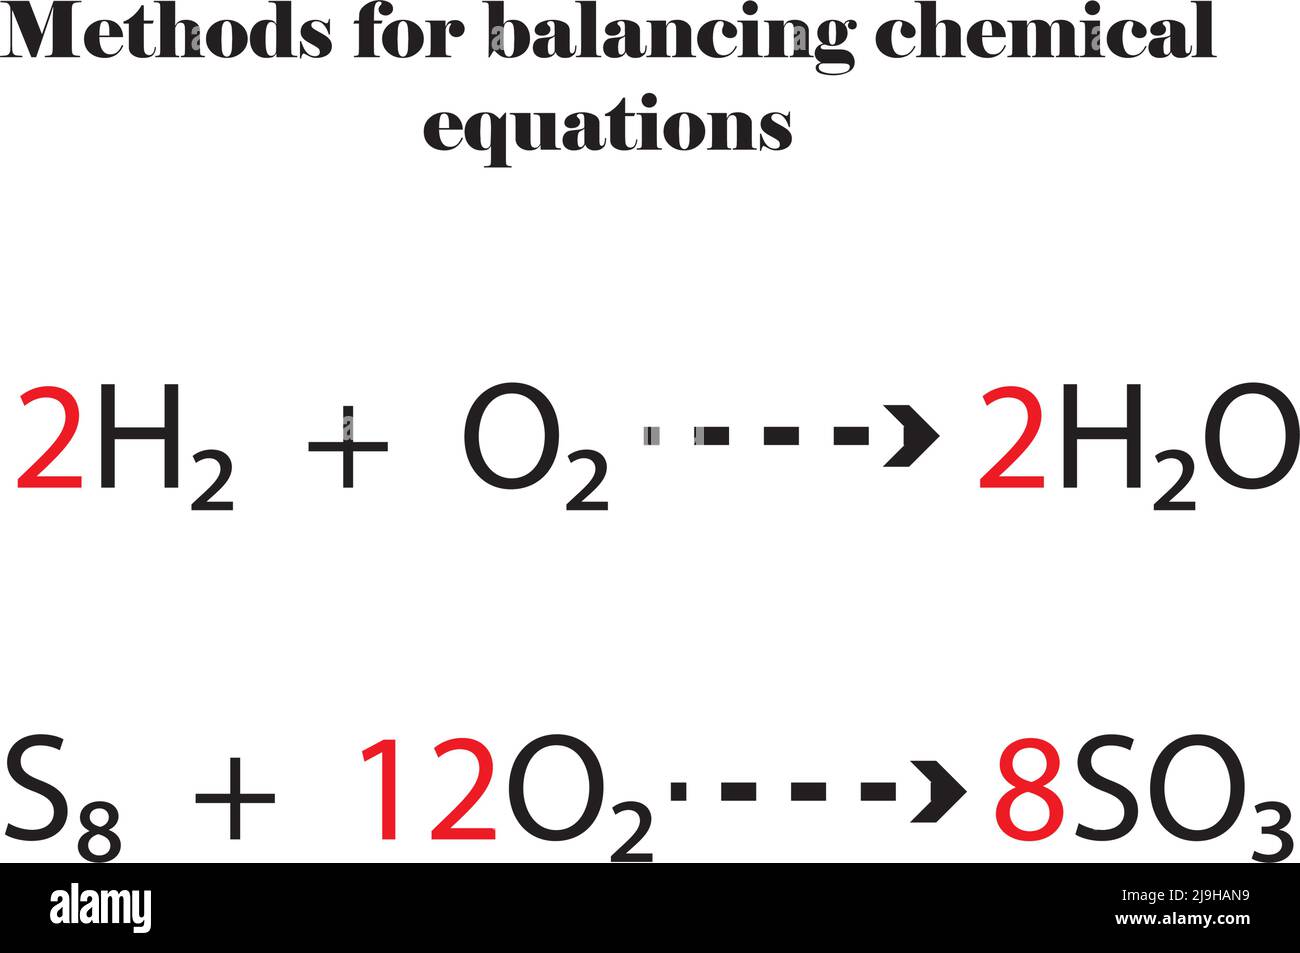 Methods for balancing chemical equations,example of 2 equations balancing.study content for chemistry students,vector illustration. Stock Vector